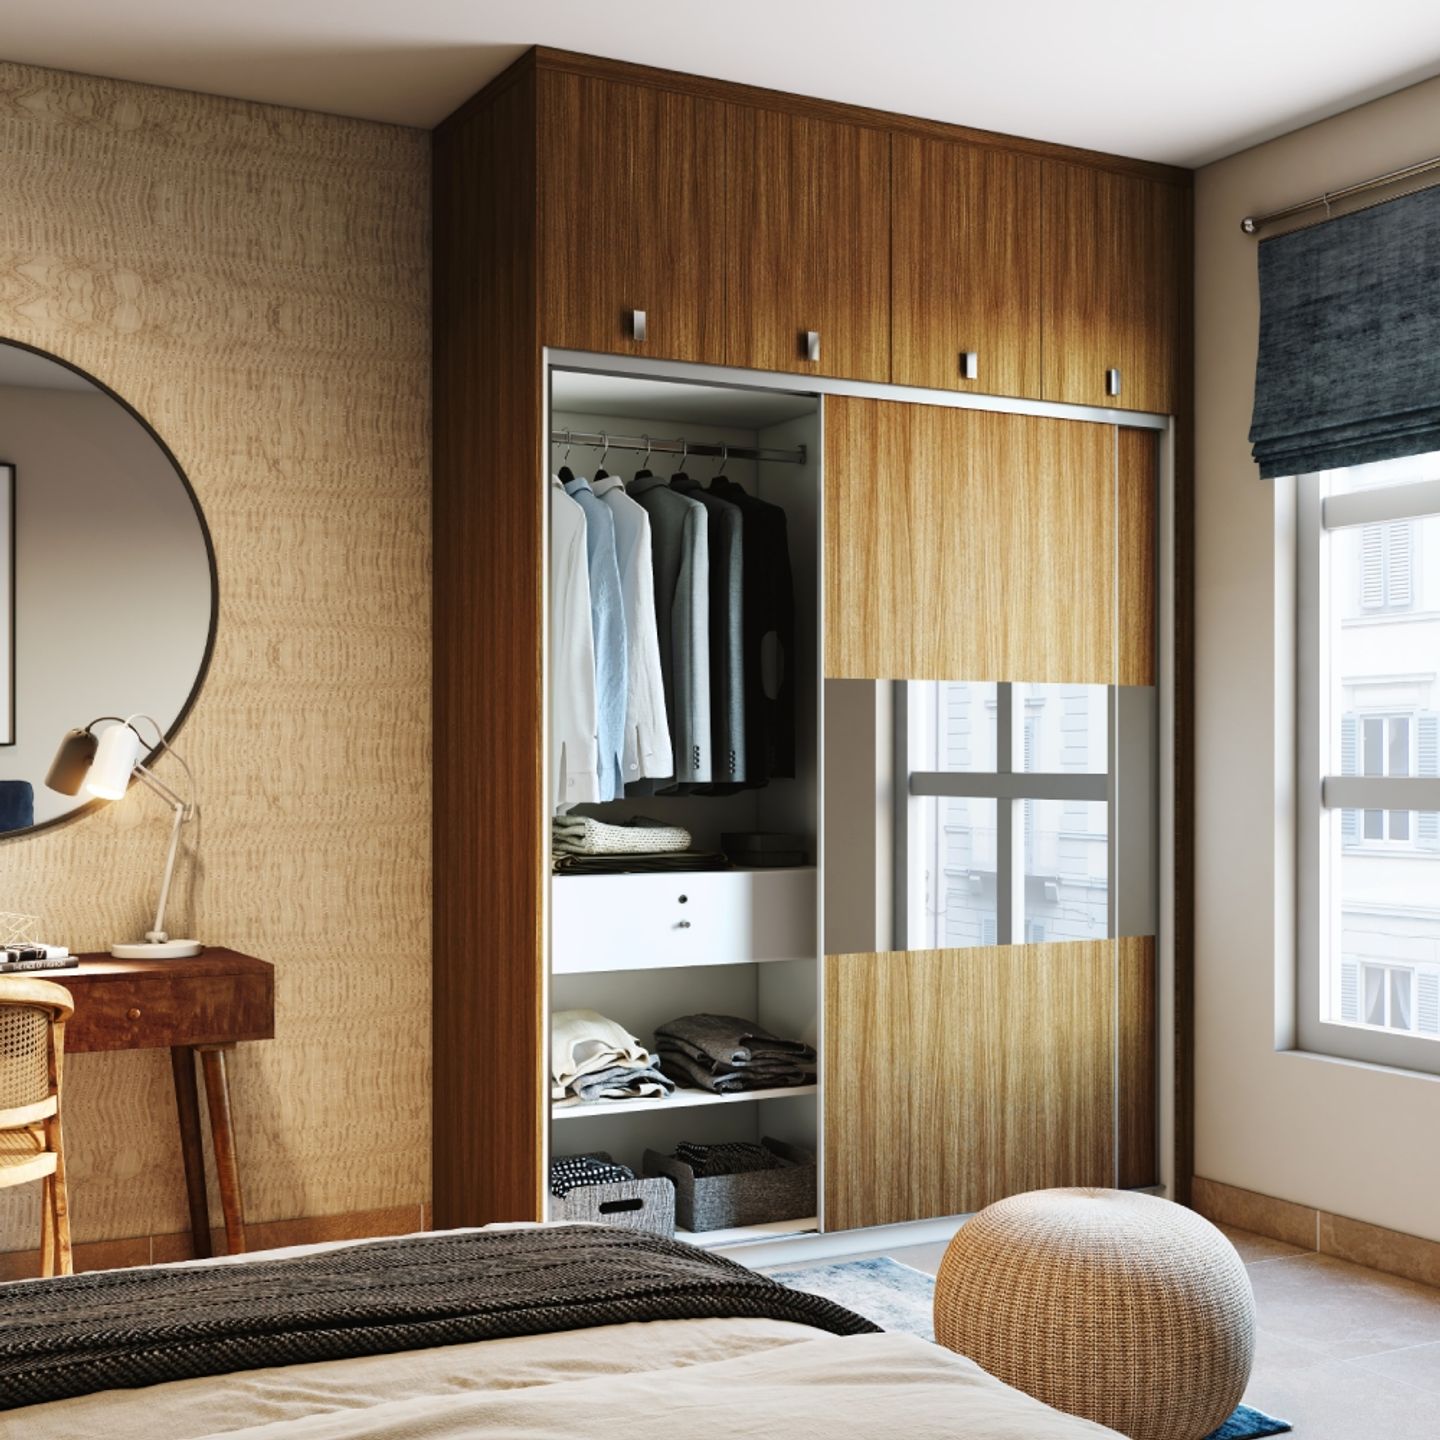 Wooden 2-Door Sliding Wardrobe Design With Mirror And Integrated Dressing Unit - Livspace